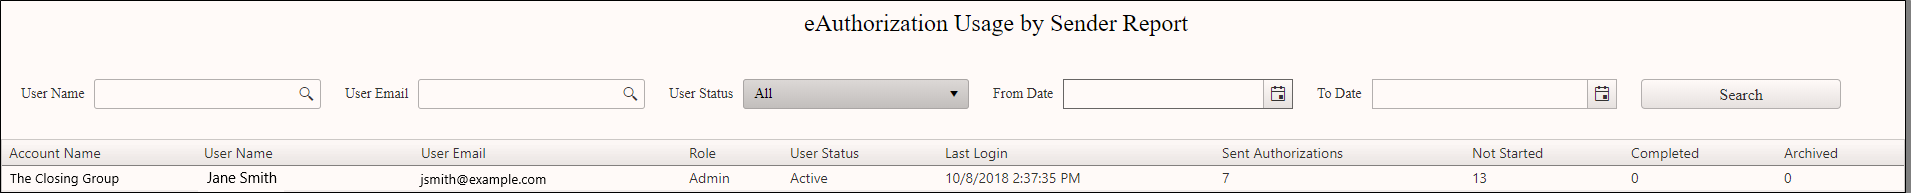 eAuthorize usage report